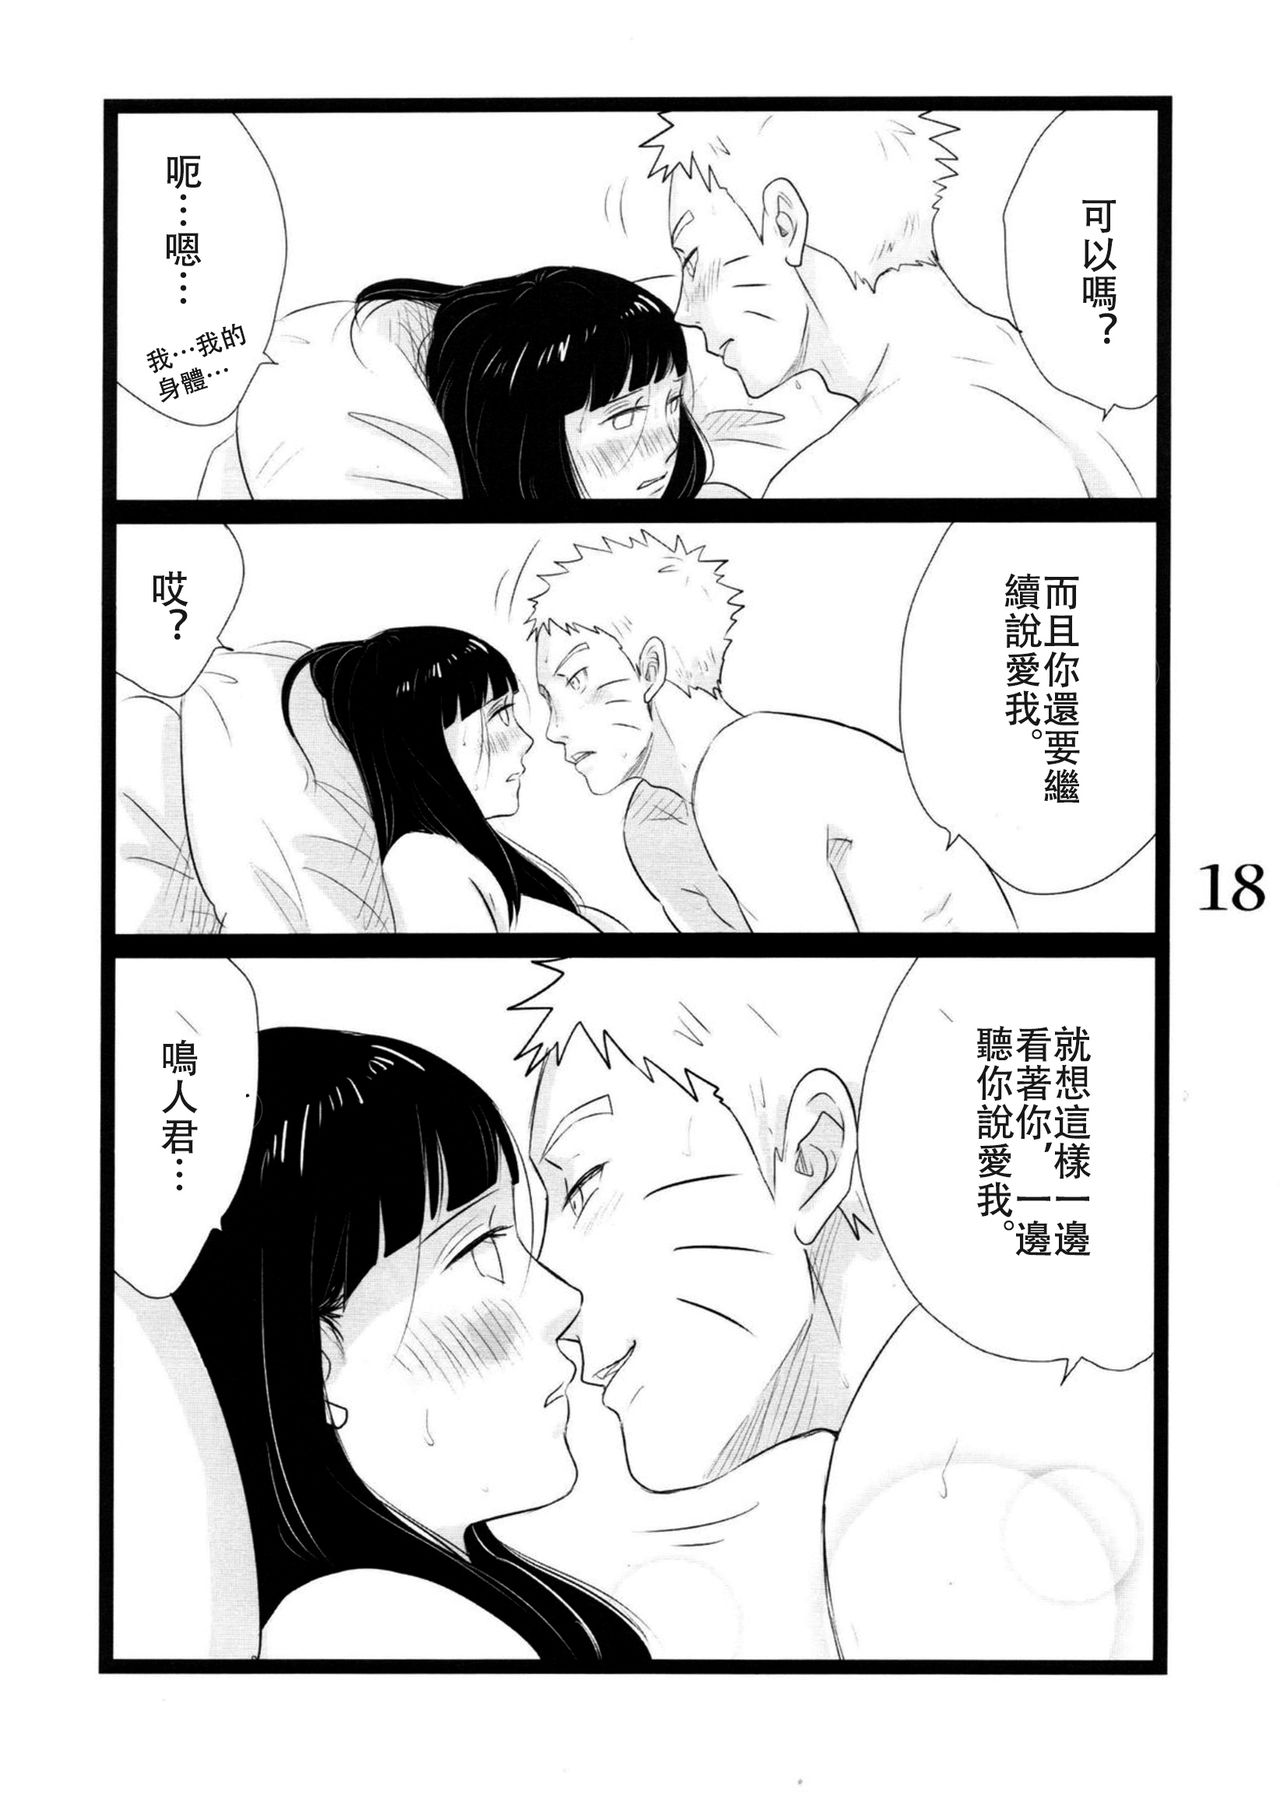 (C88) [blink (shimoyake)] YOUR MY SWEET - I LOVE YOU DARLING (Naruto) [Chinese] [沒有漢化] page 19 full